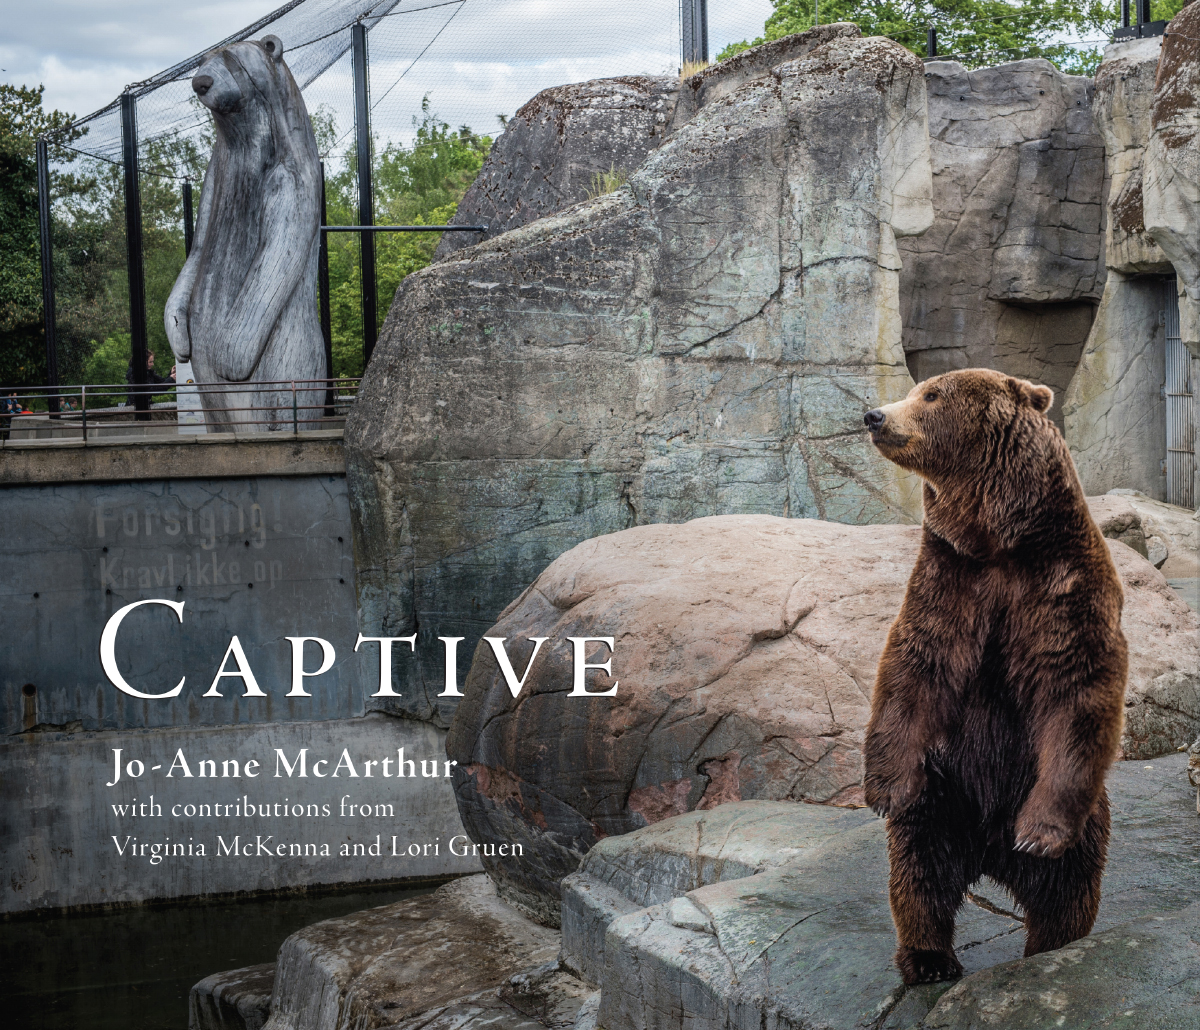 In Captive, Jo-Anne McArthur tells a story we choose not to see